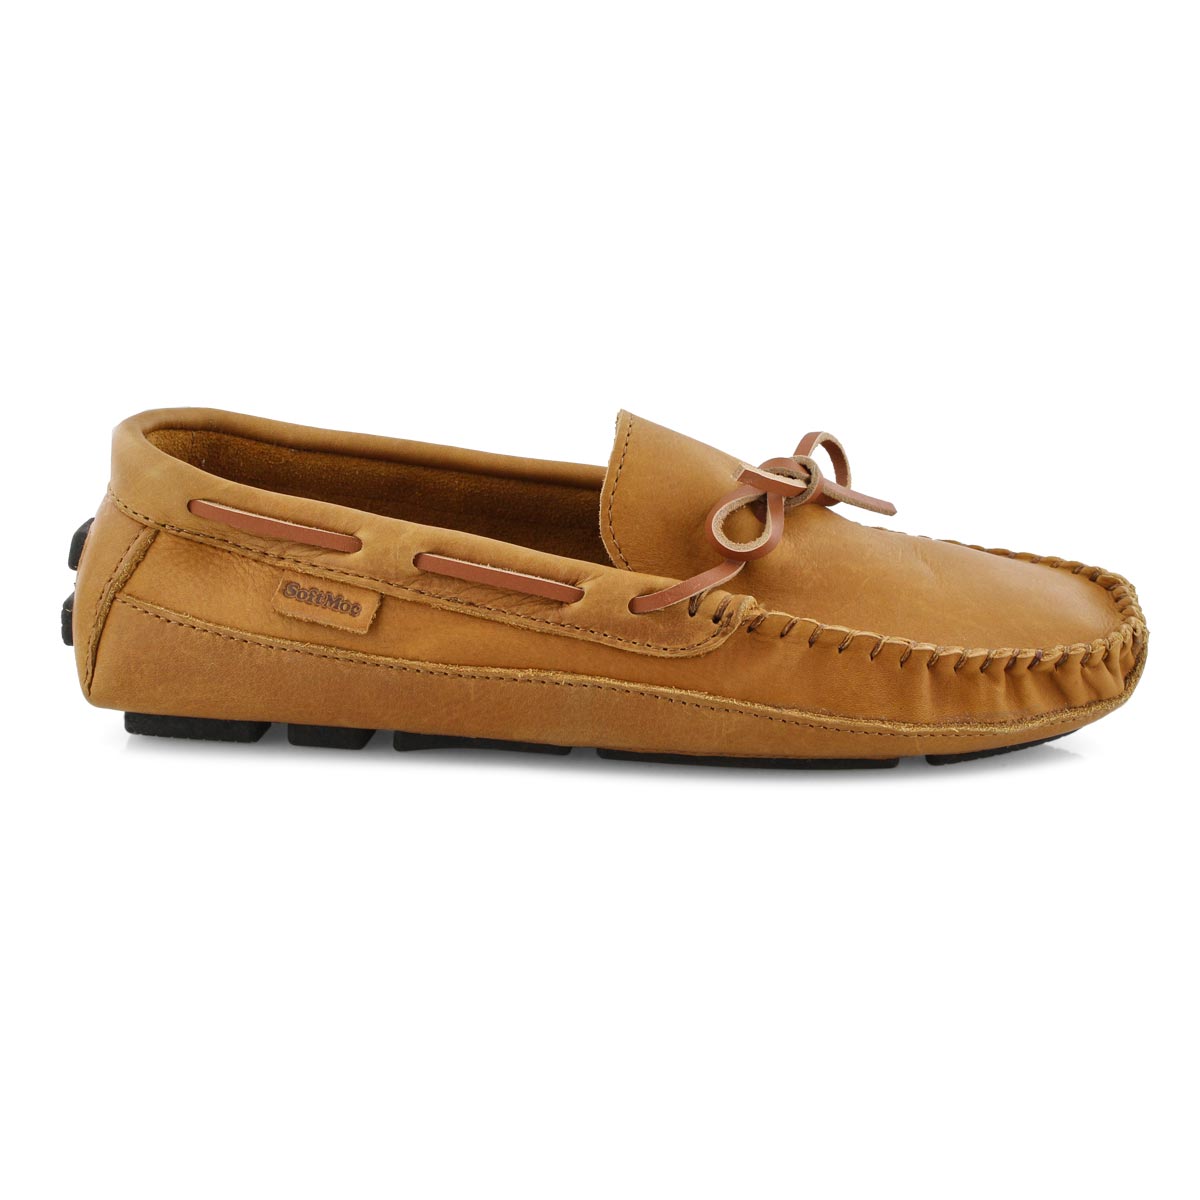 SoftMoc Men'a CESAR brown double sole moccasi | SoftMoc.com